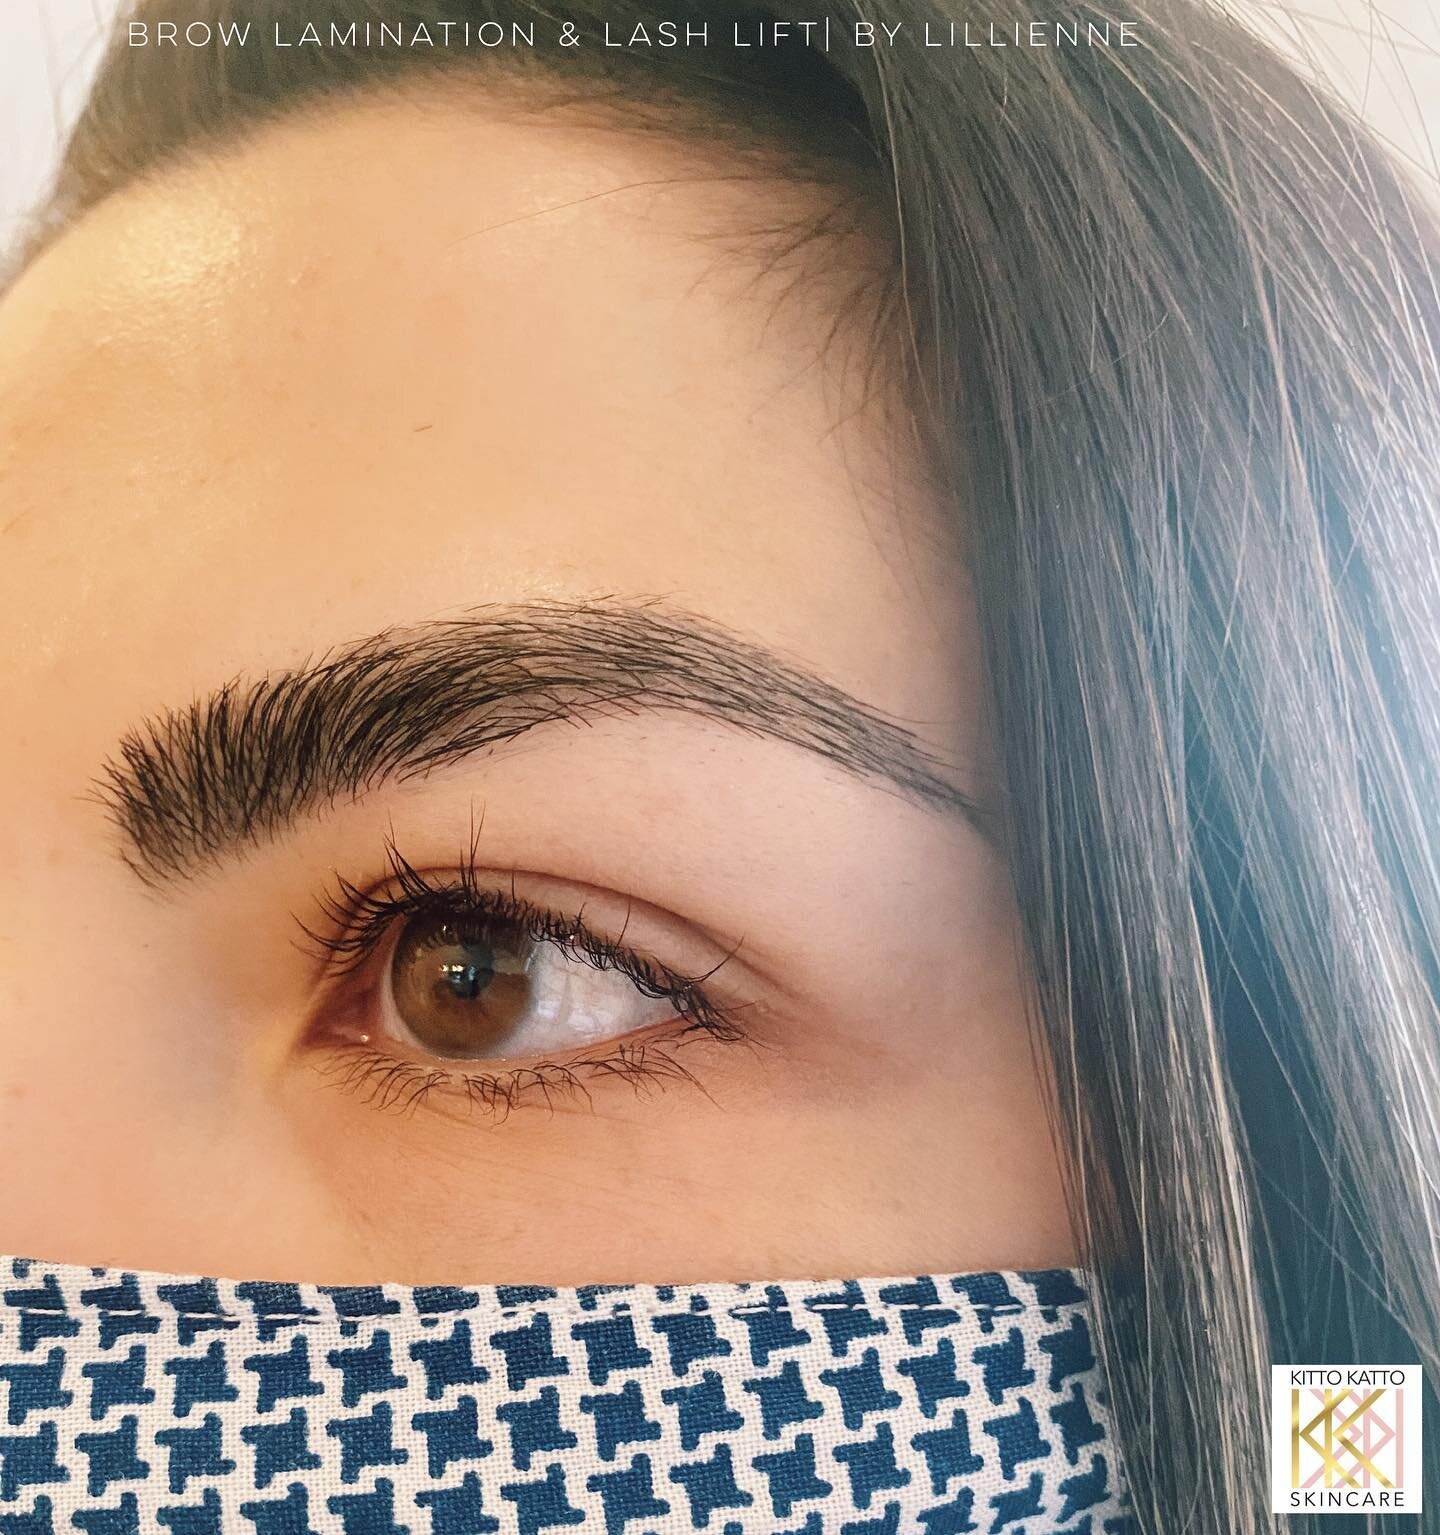 Wink wink ✨😉 &mdash;&mdash; a little after &amp; before photo of Brow lamination &amp; Lash Lift service.